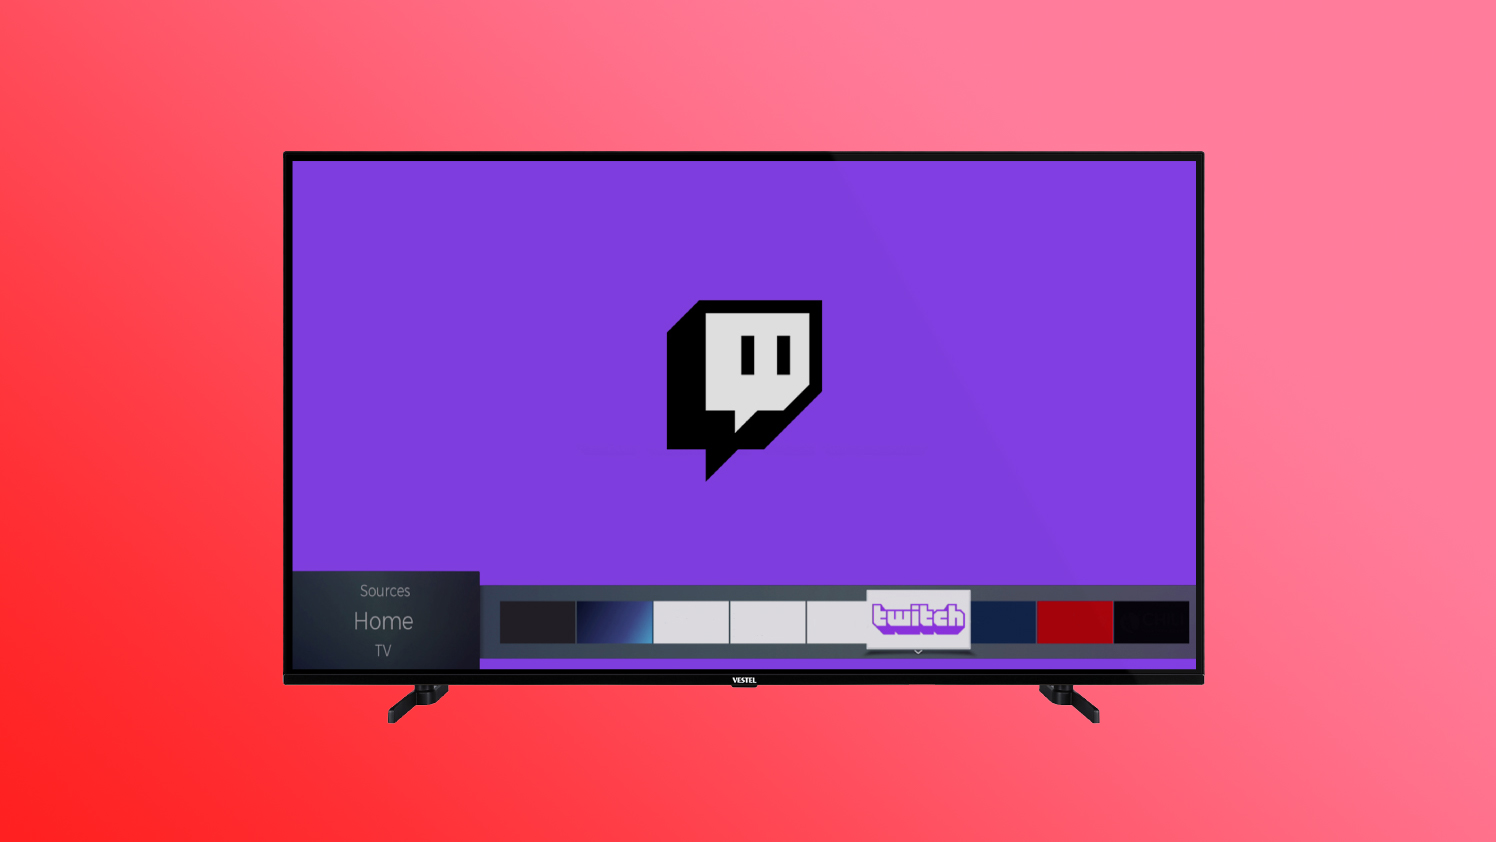 Download the twitch app on your phone or smart device. Twitch.tv/kevinlloydmusic  Going Live tonight 6/5 6:30pm.